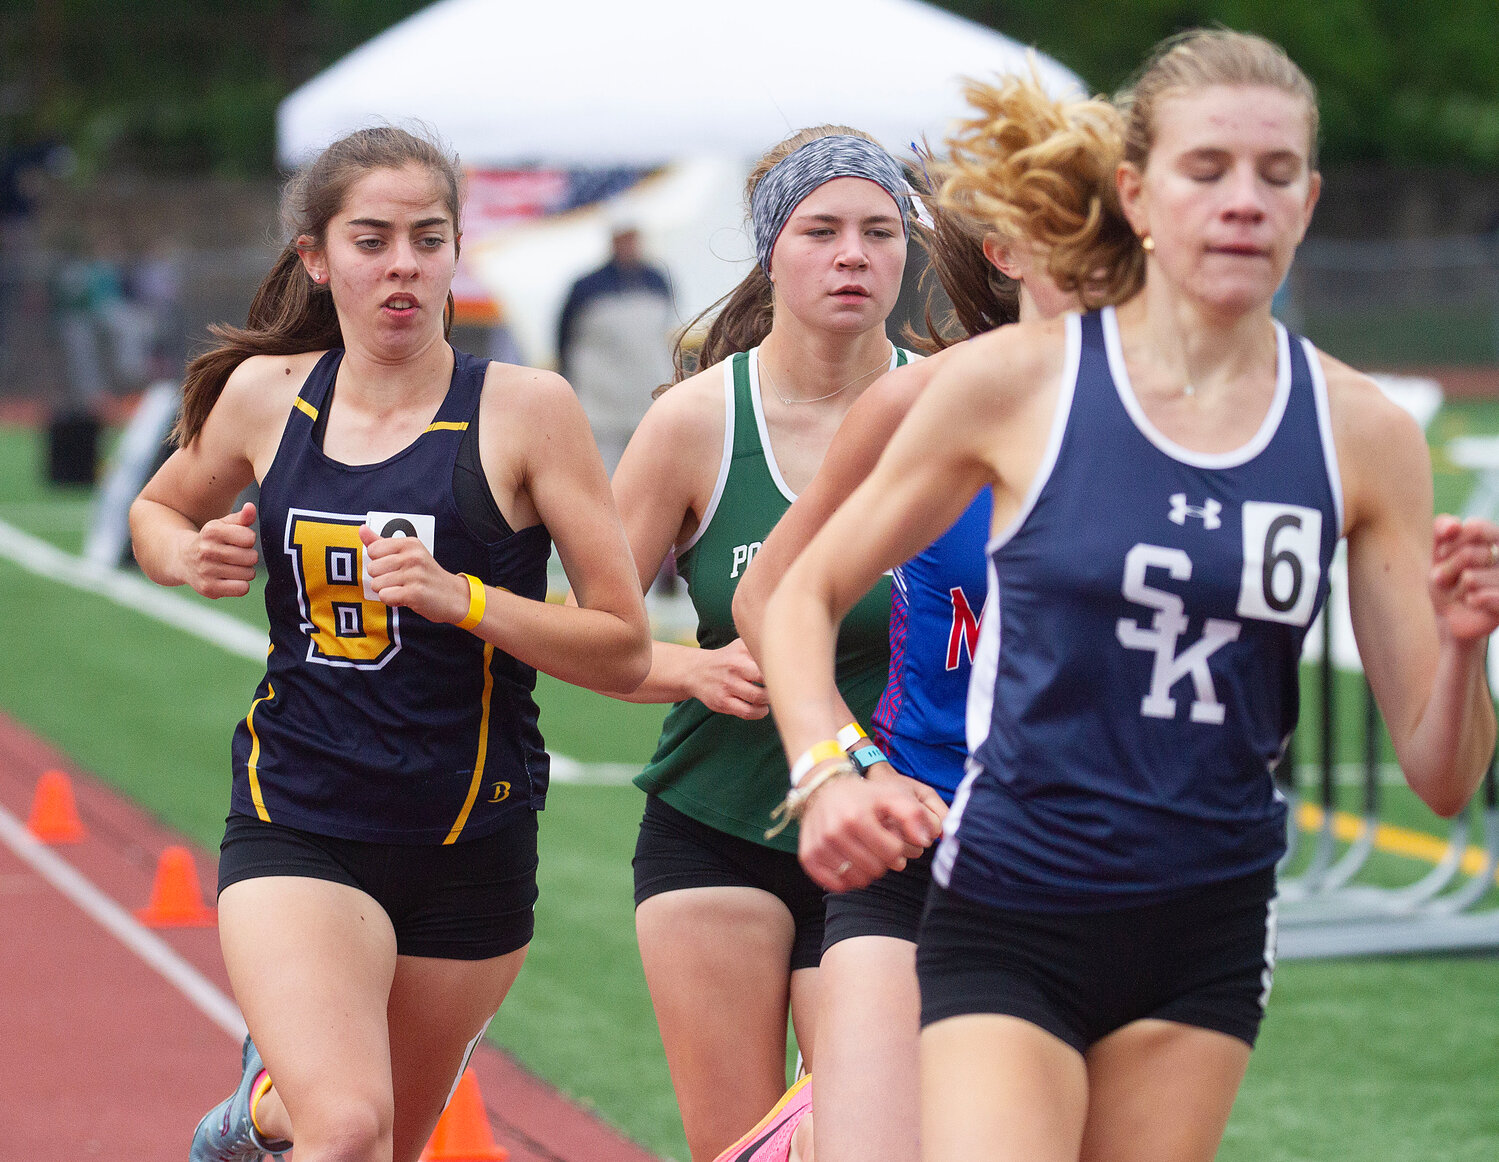 Barrington's Caroline Reznik (left) competes in the 1,500-meter race at the state track meet.